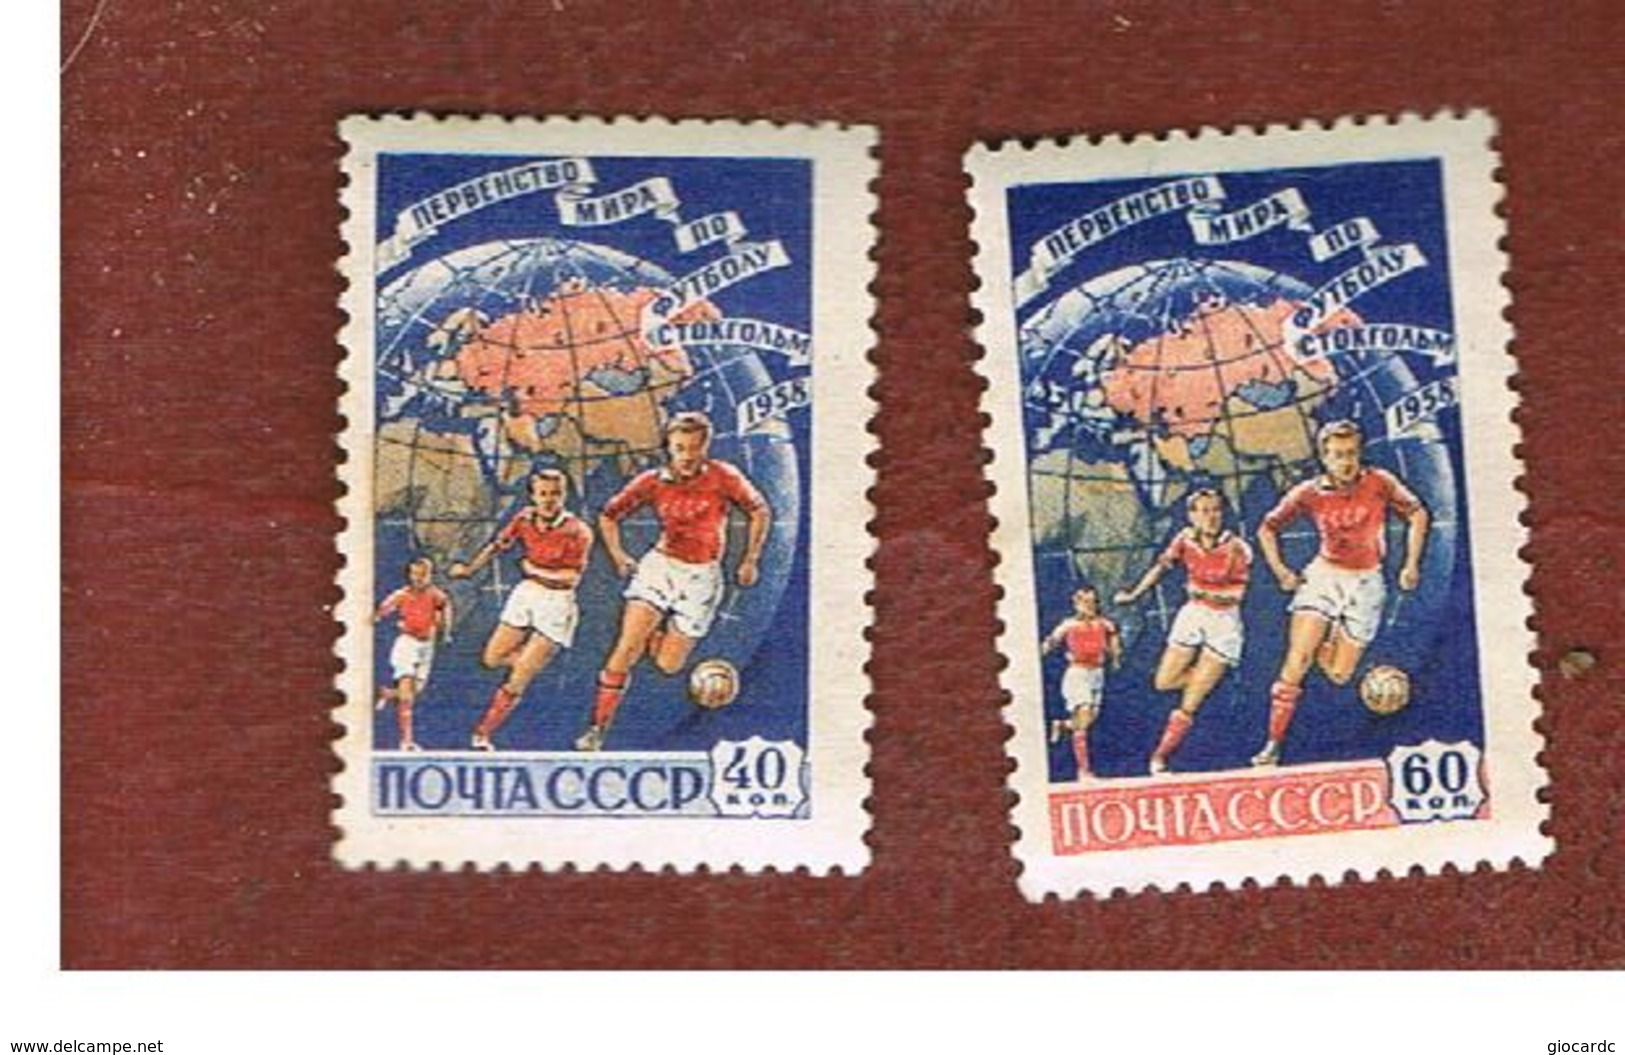 URSS -  SG  2210.2211   -  1958  WORLD CUP FOOTBALL (COMPLET SET OF 2)   -   UNUSED WITHOUT GUM - Ongebruikt